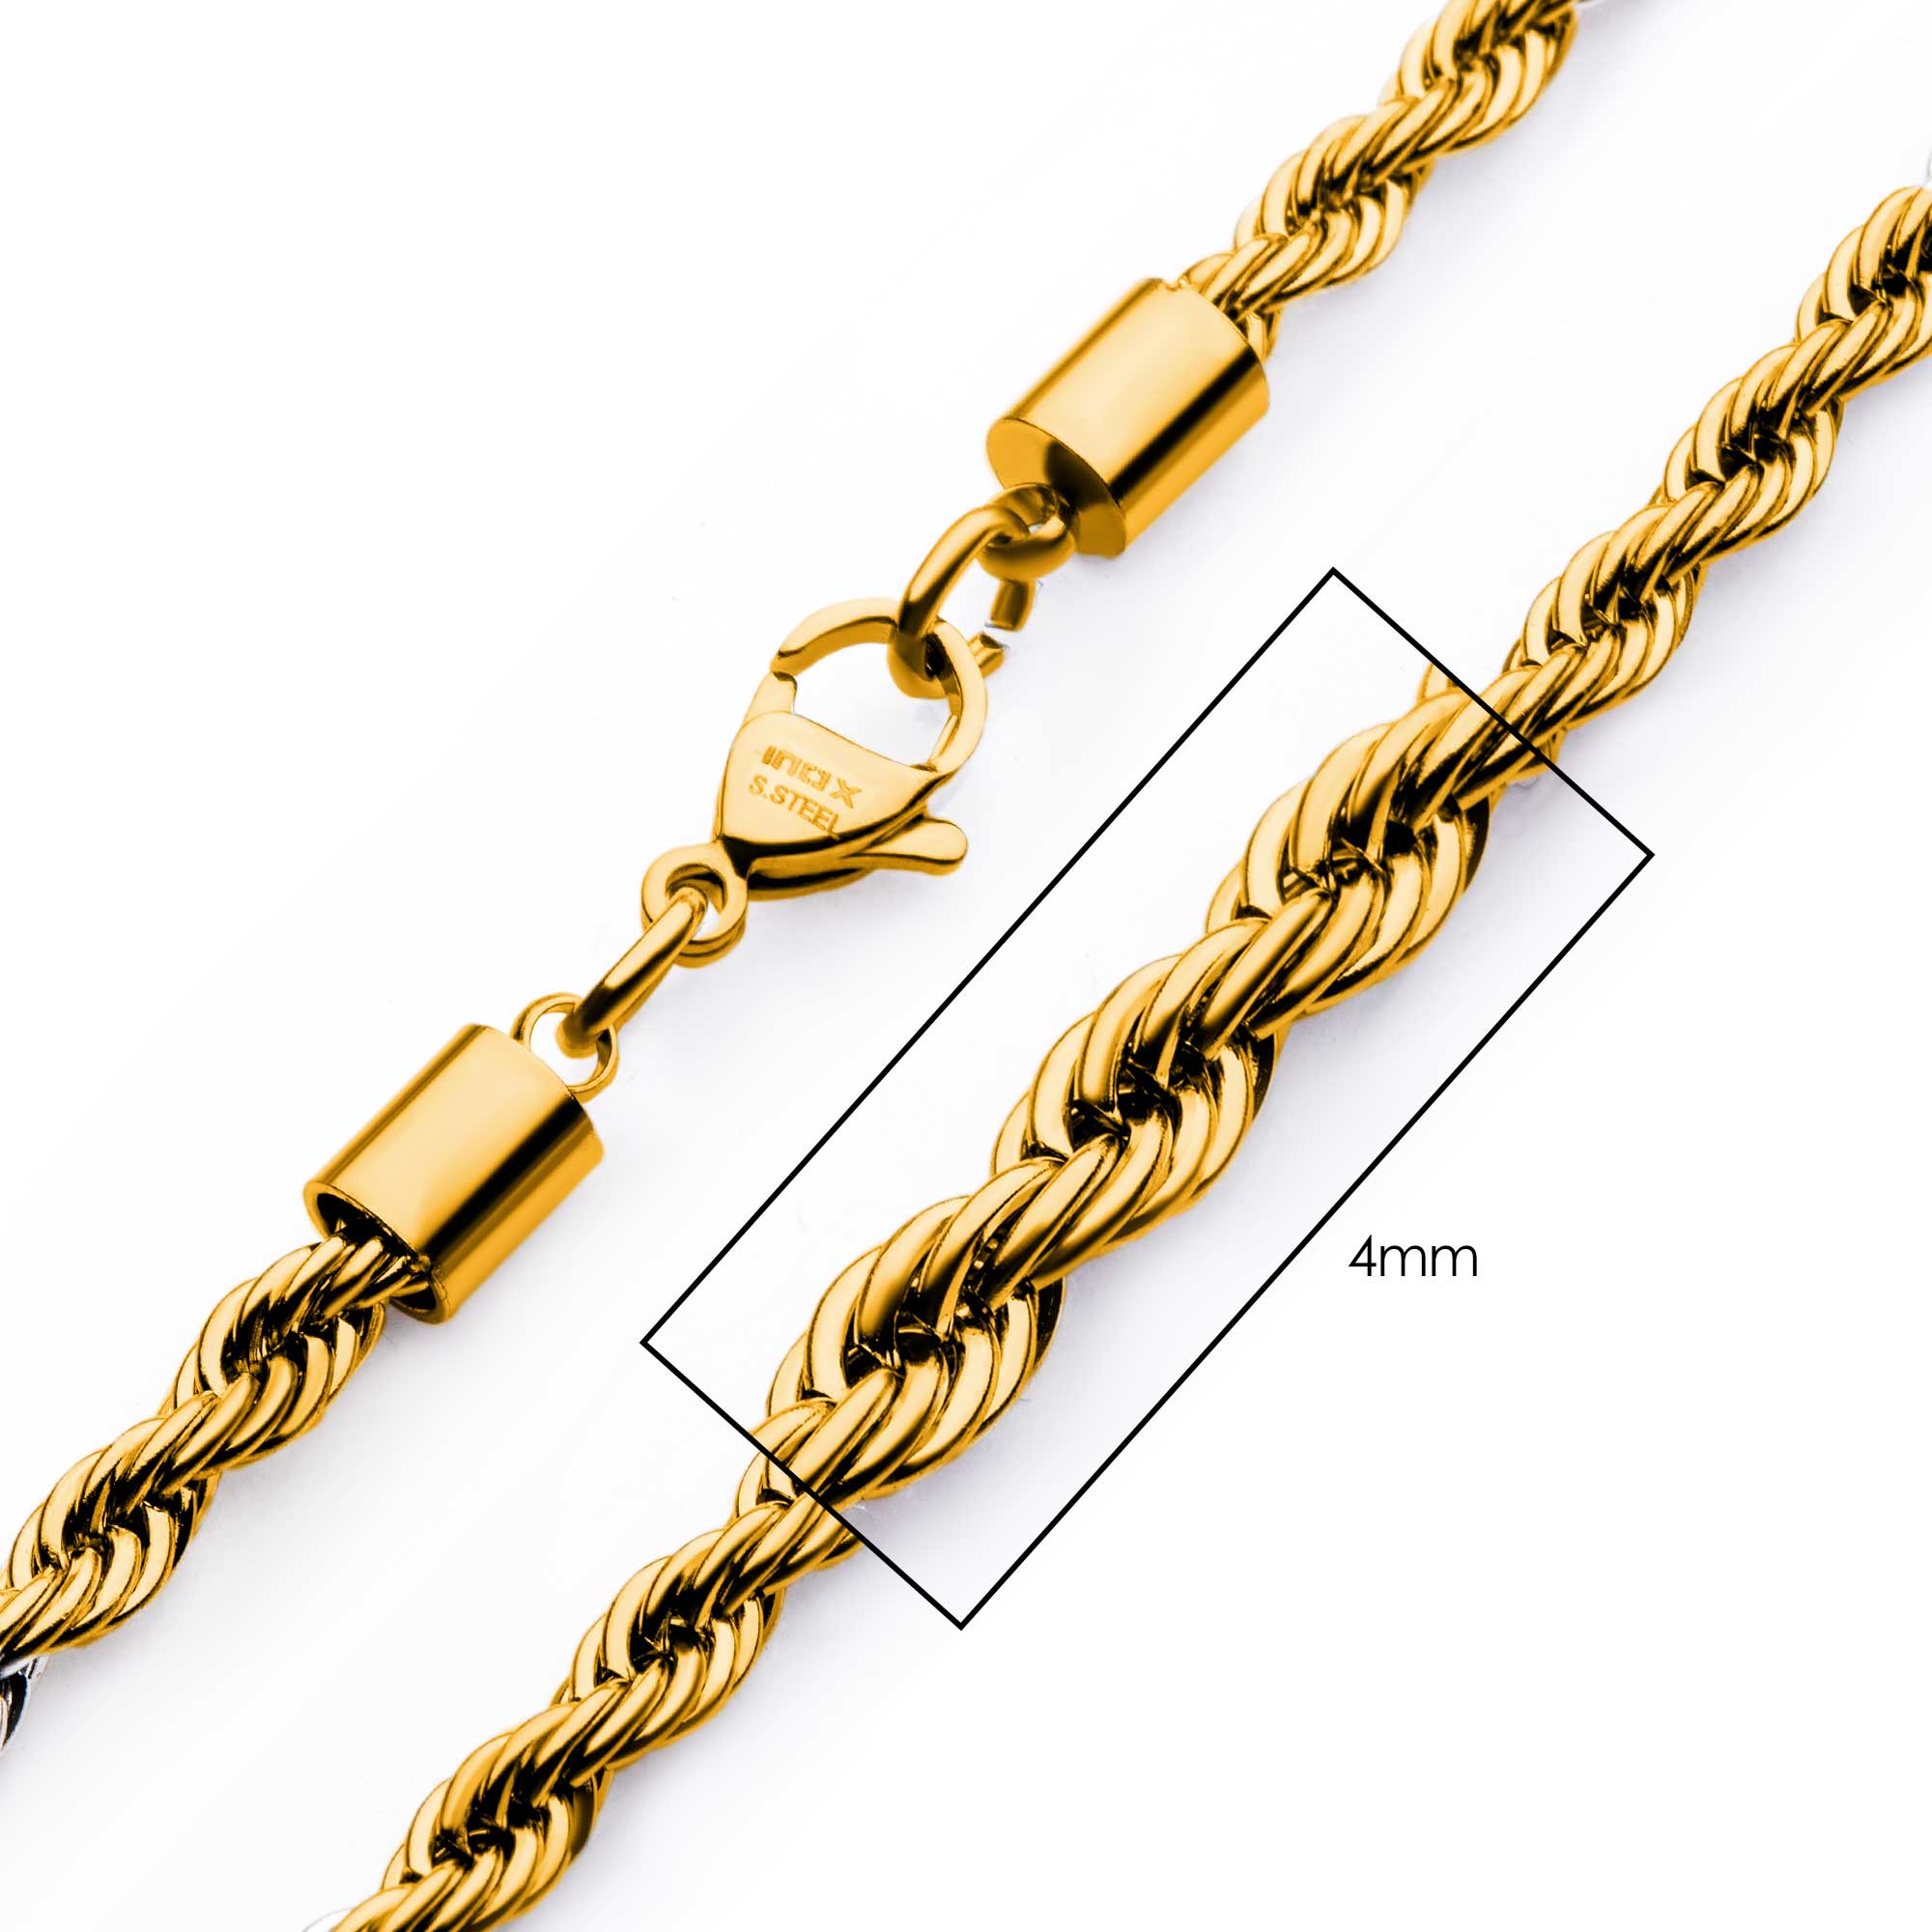 4mm 18K Gold Plated Rope Chain P.K. Bennett Jewelers Mundelein, IL